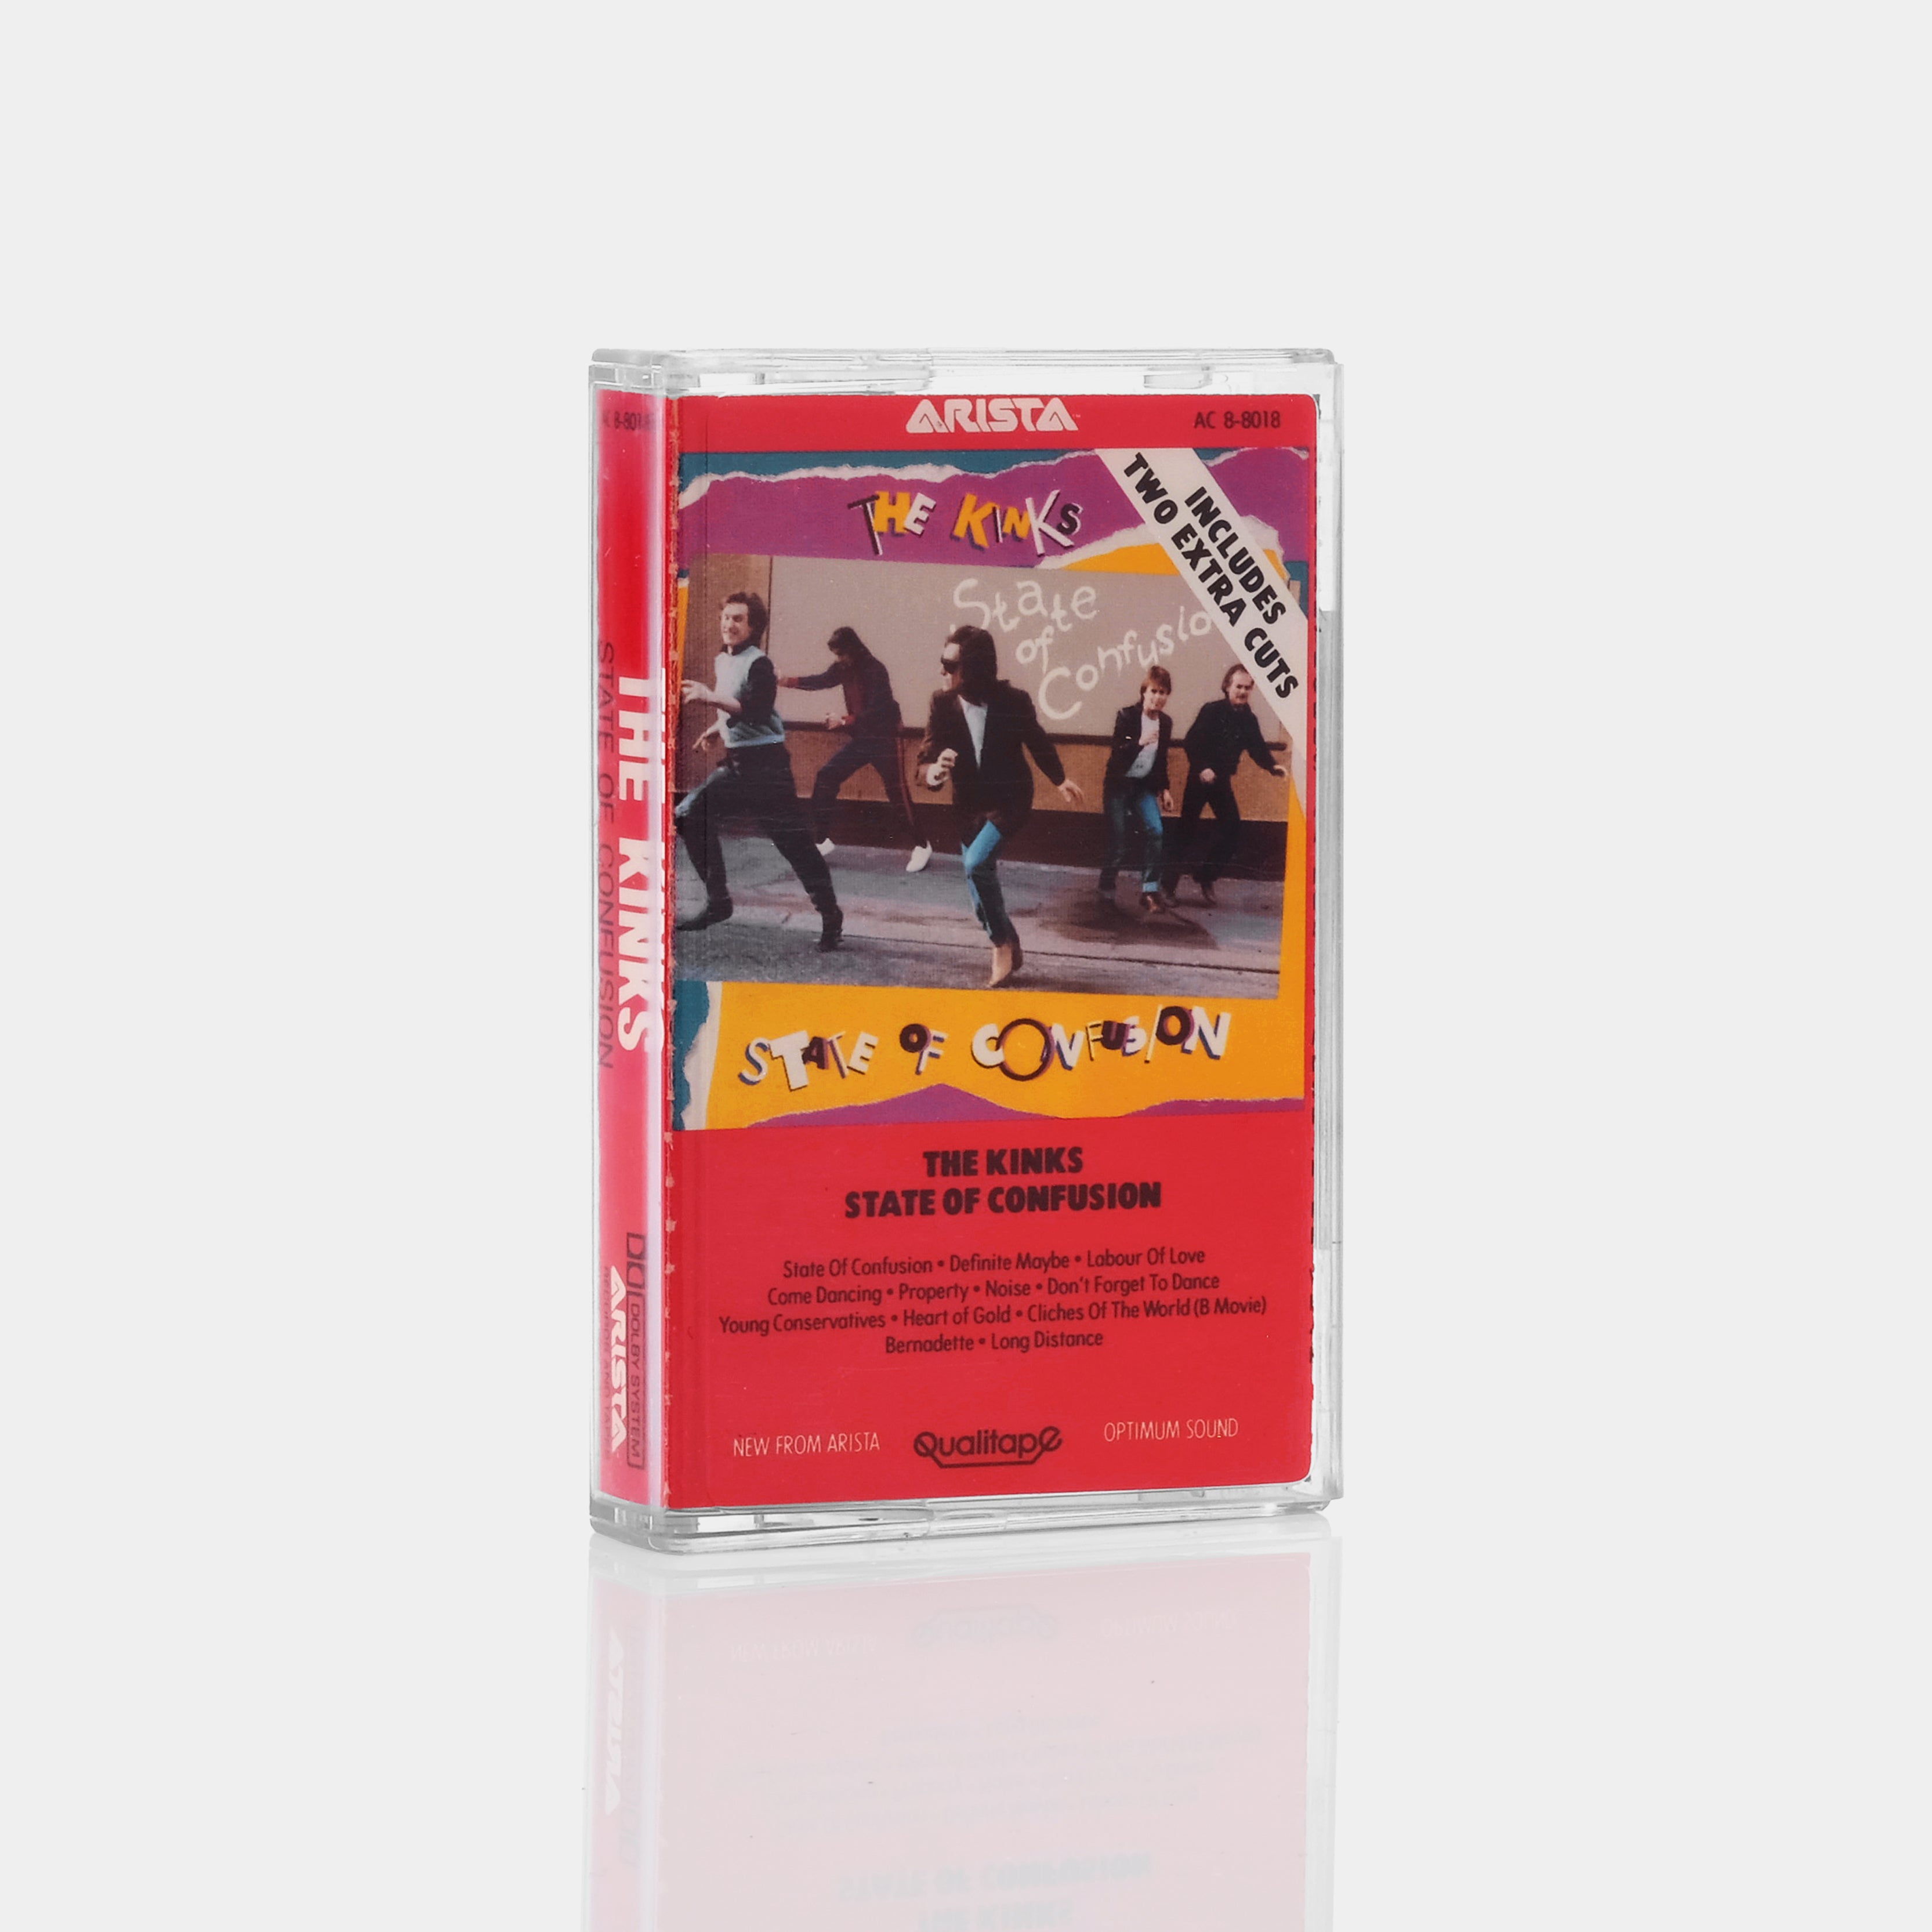 The Kinks - State Of Confusion Cassette Tape